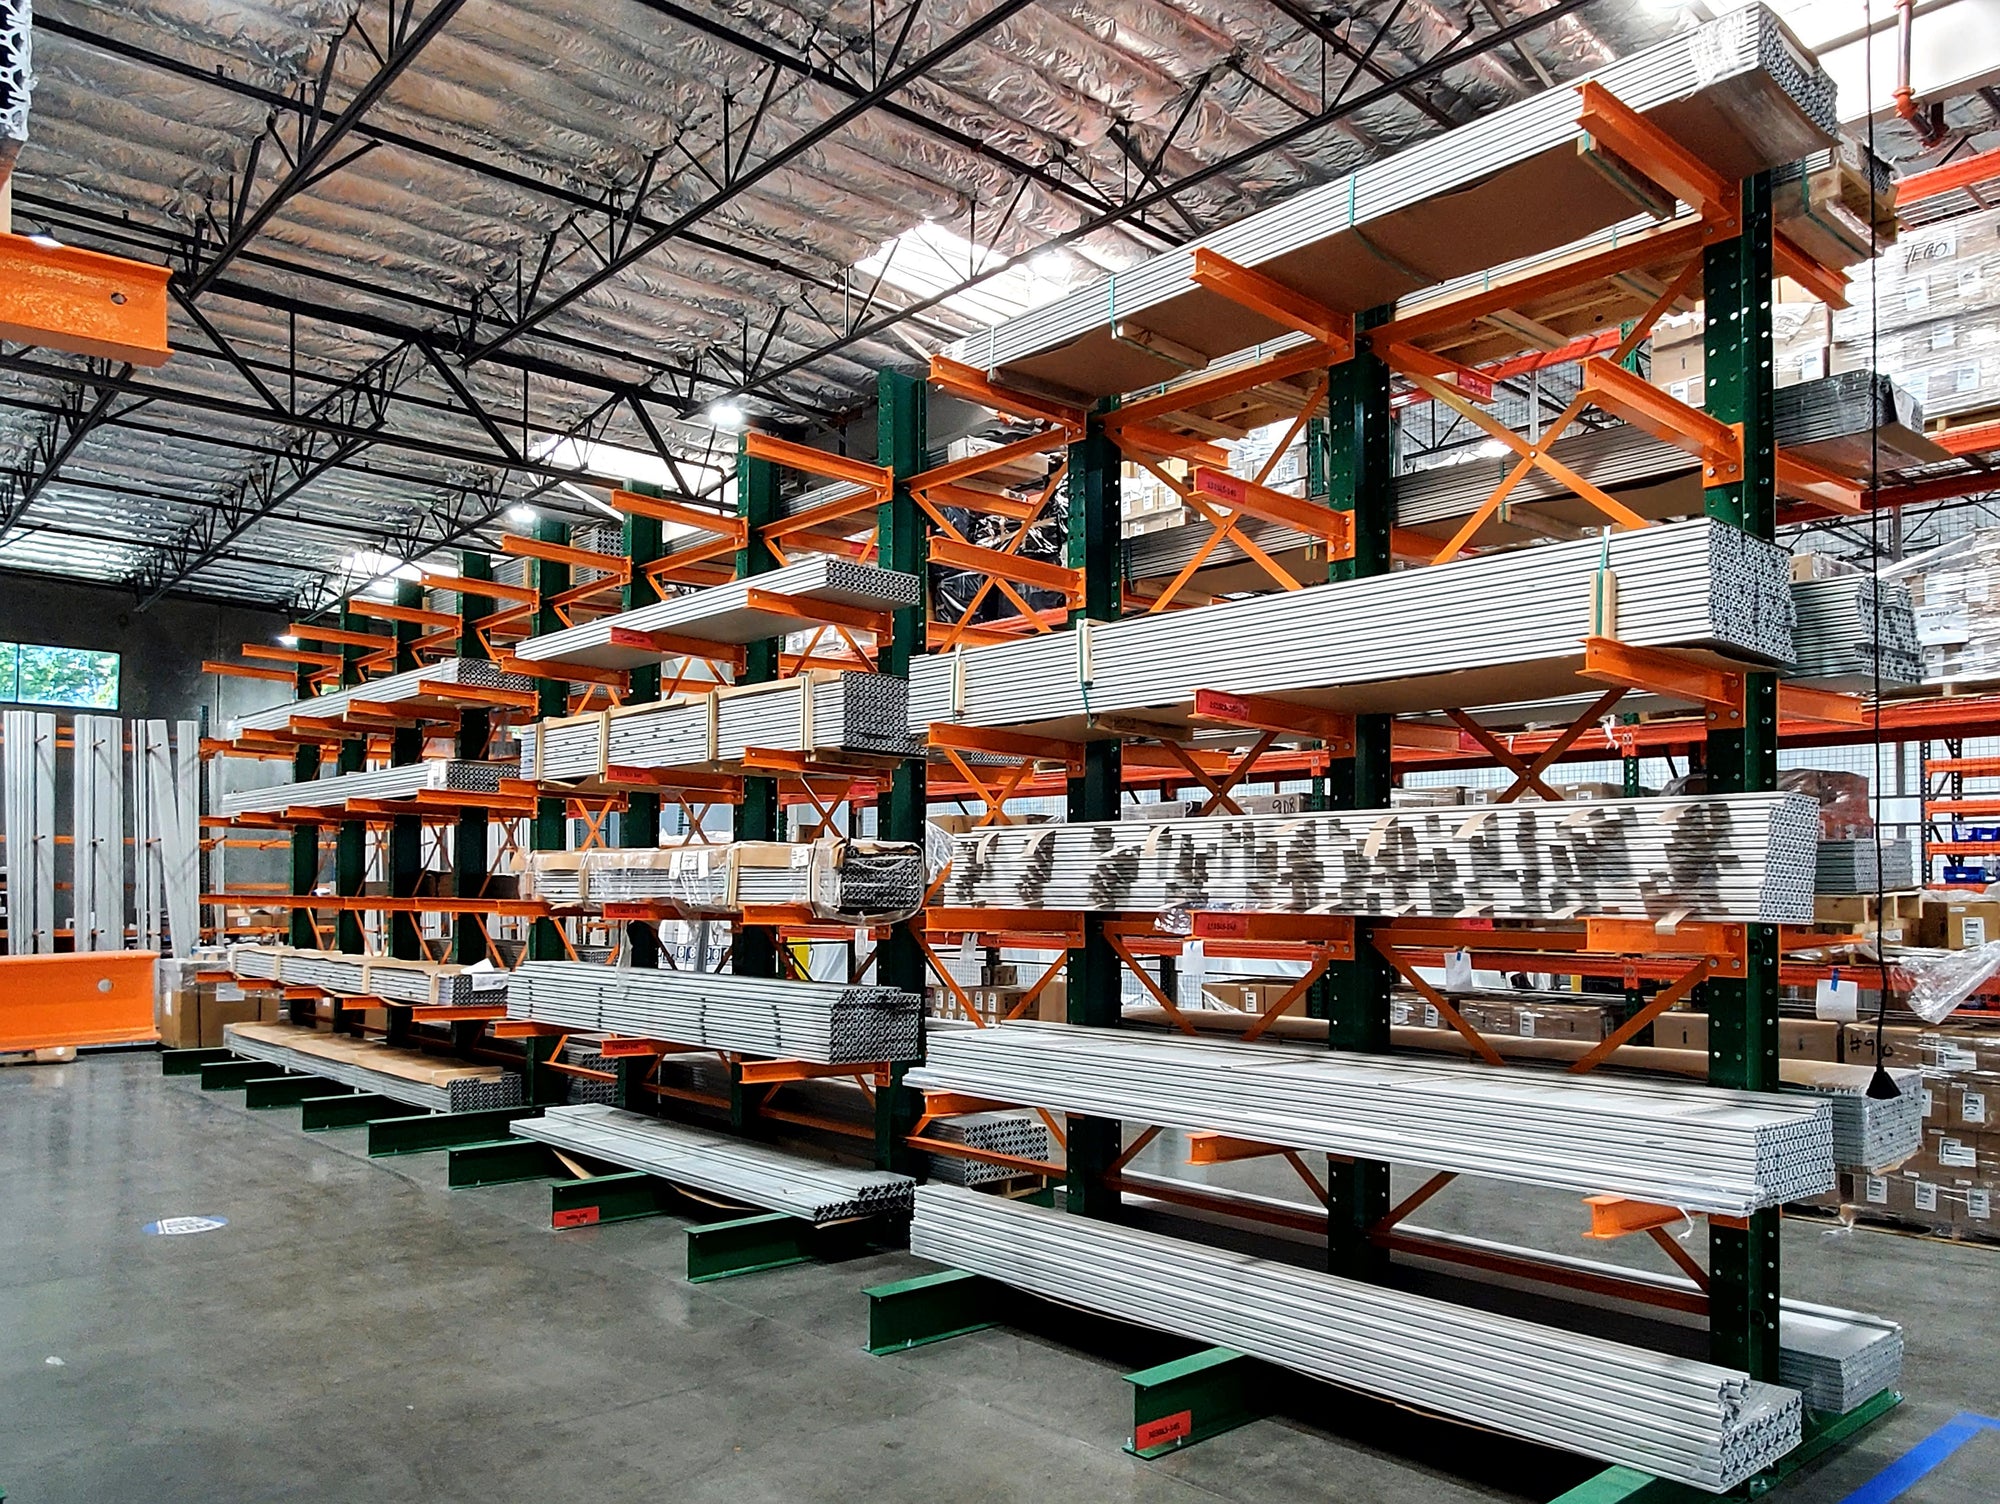 Warehouse filled with green and orange shelving with metal organized on the shelving